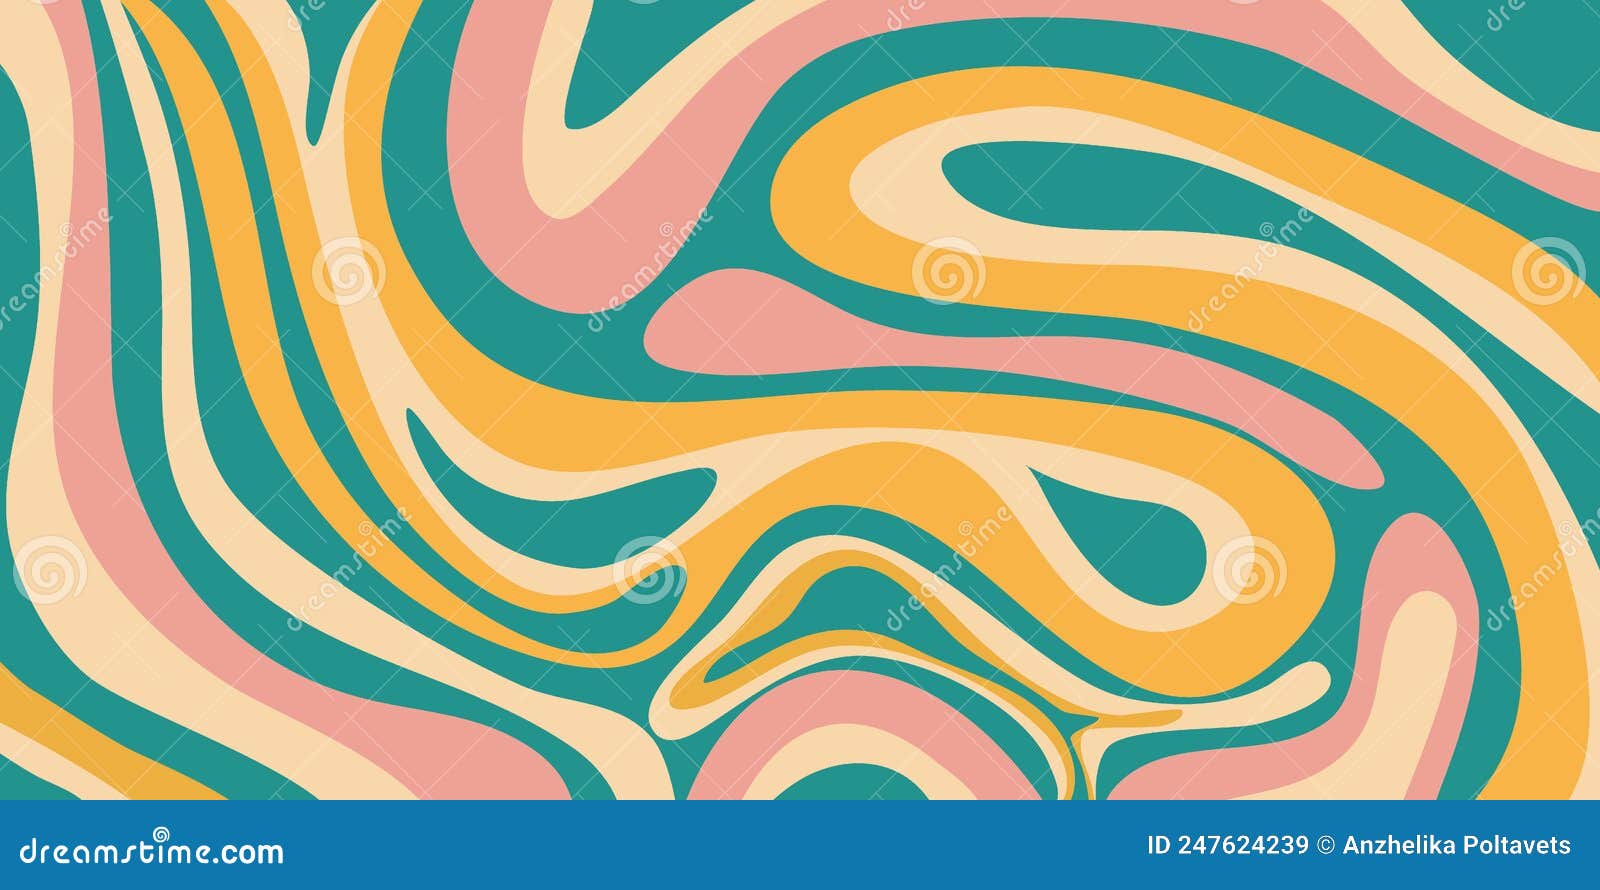 Psychedelic Swirl Groovy Pattern. Psychedelic Retro Wave Wallpaper ...